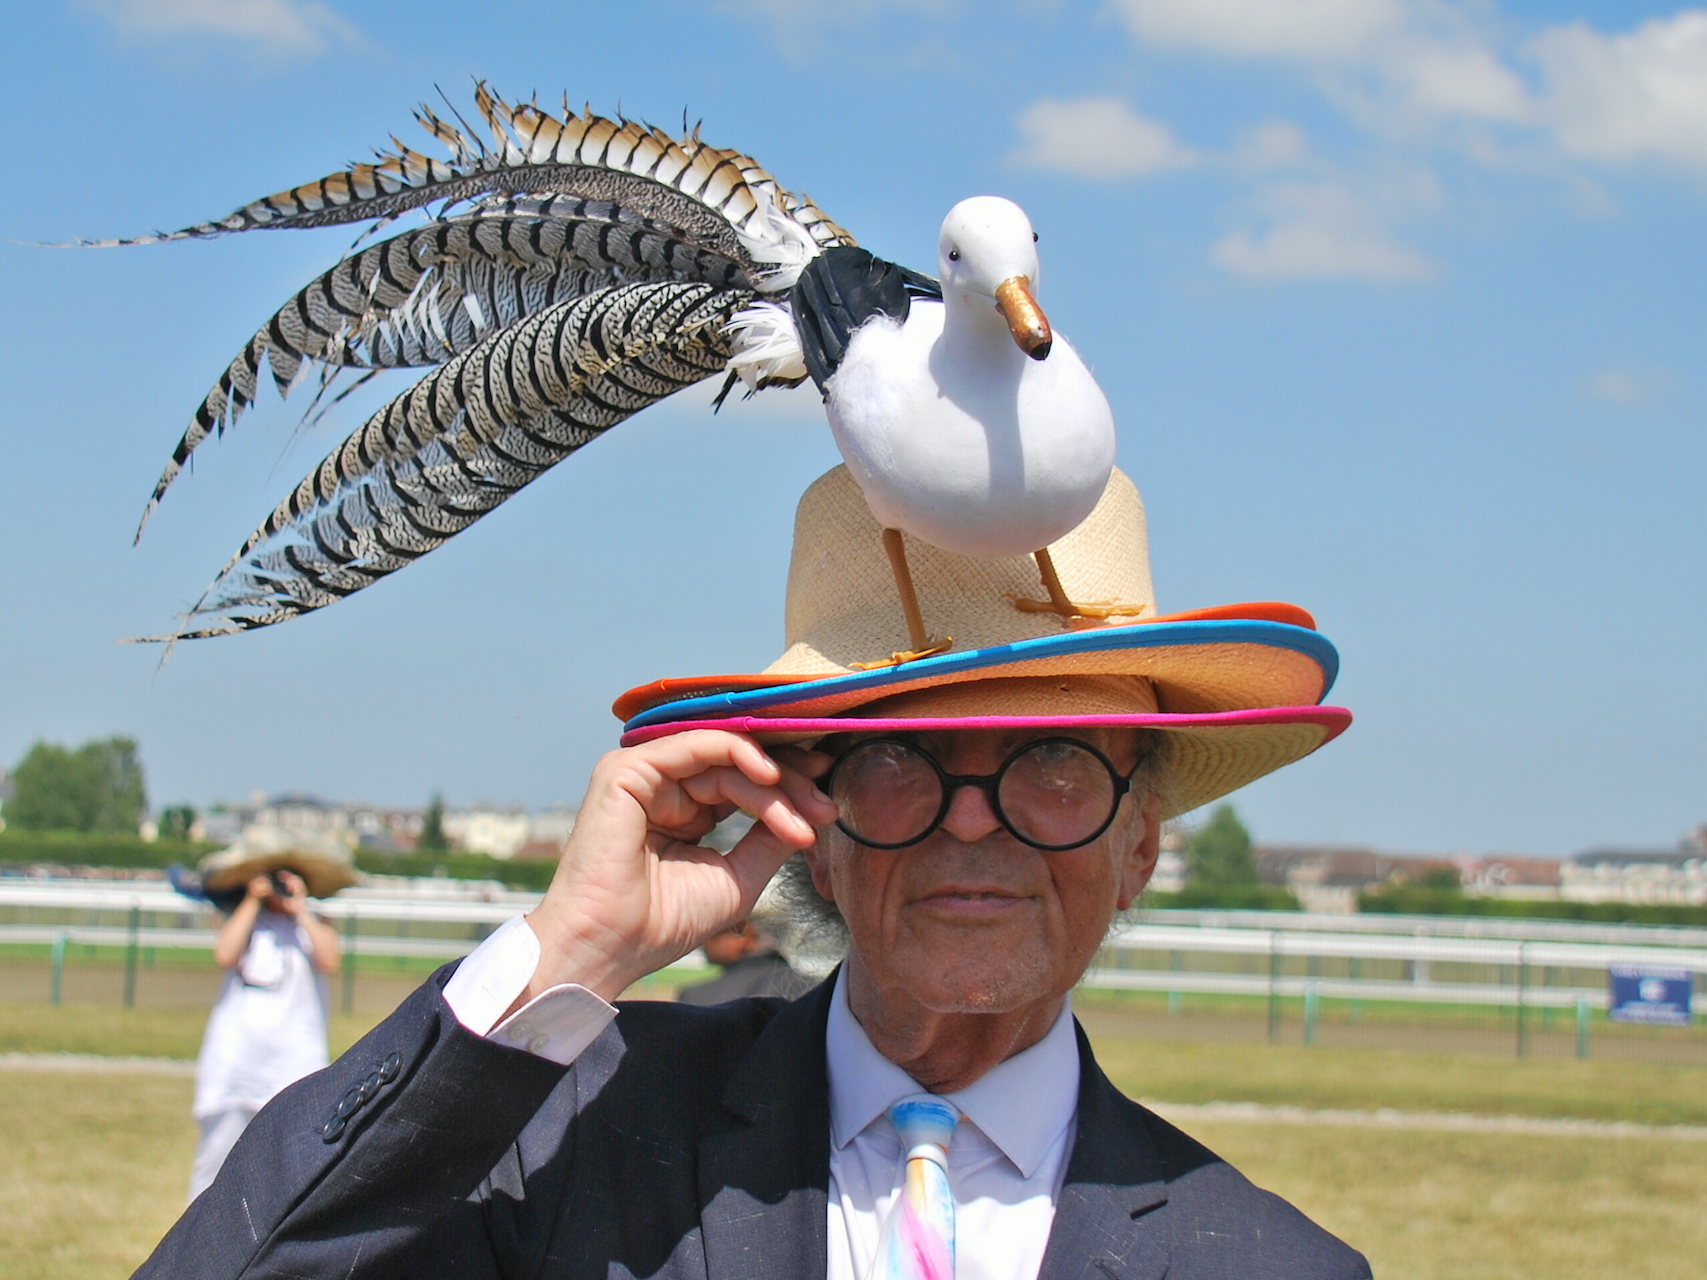 Hat-maker David Shilling at the Prix de Diane last year: “Some people made very charming and upbeat comments about my hat … which was really kind and friendly,” he said. Photo: John Gilmore